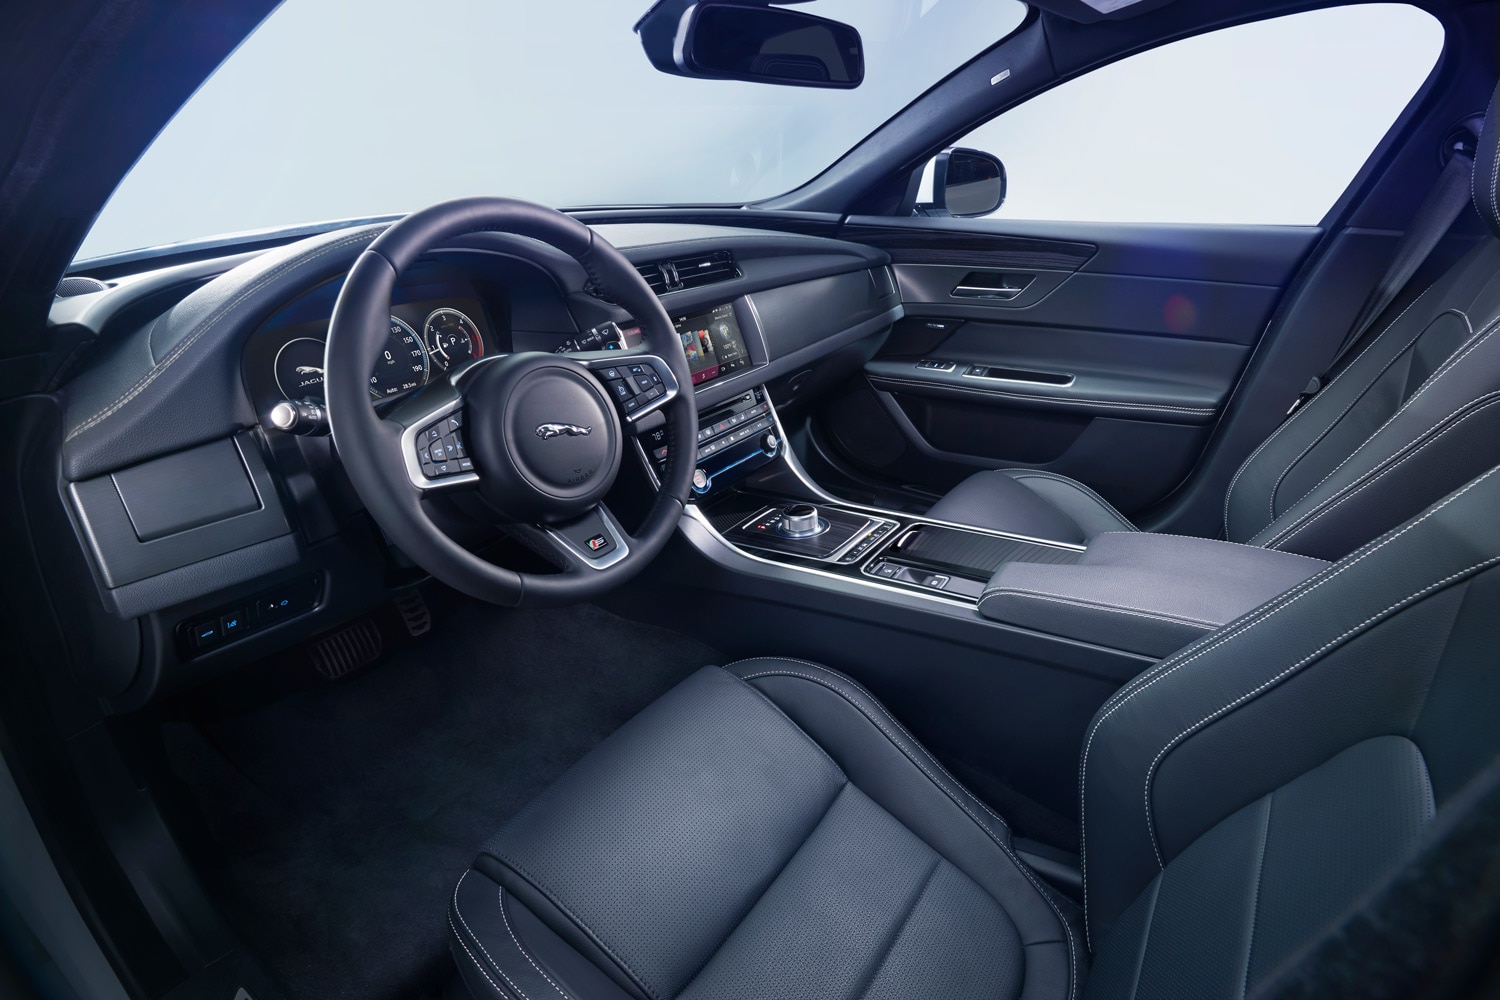 Jaguar XF interior with rotary shift dial